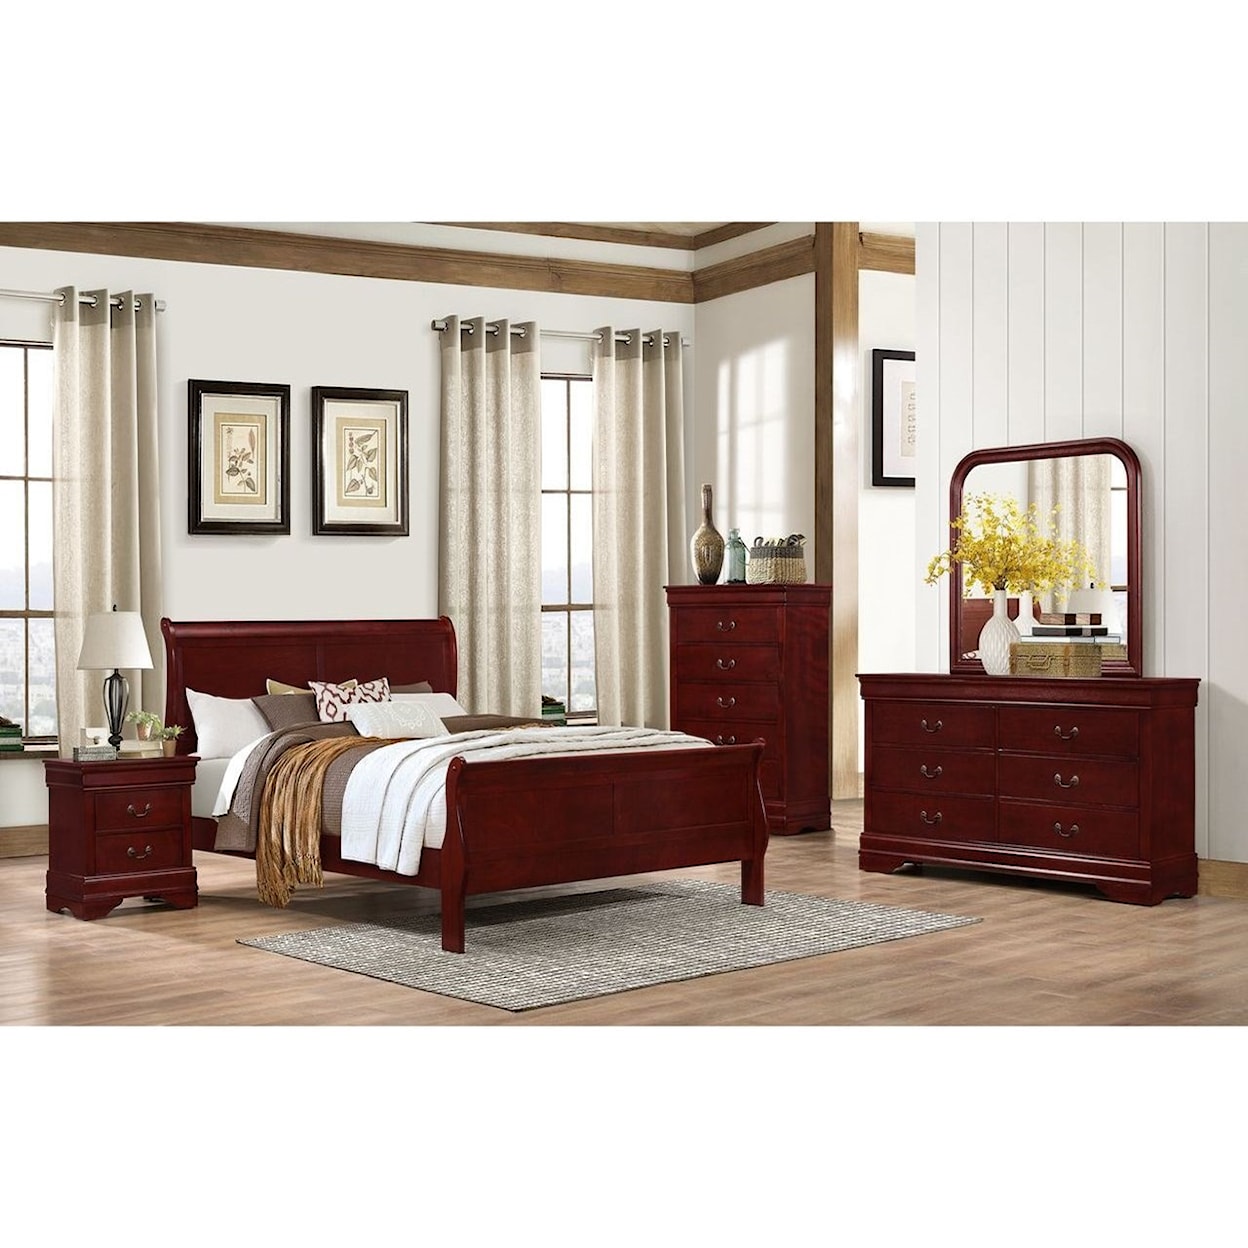 Lifestyle 4937 Twin Sleigh Bed